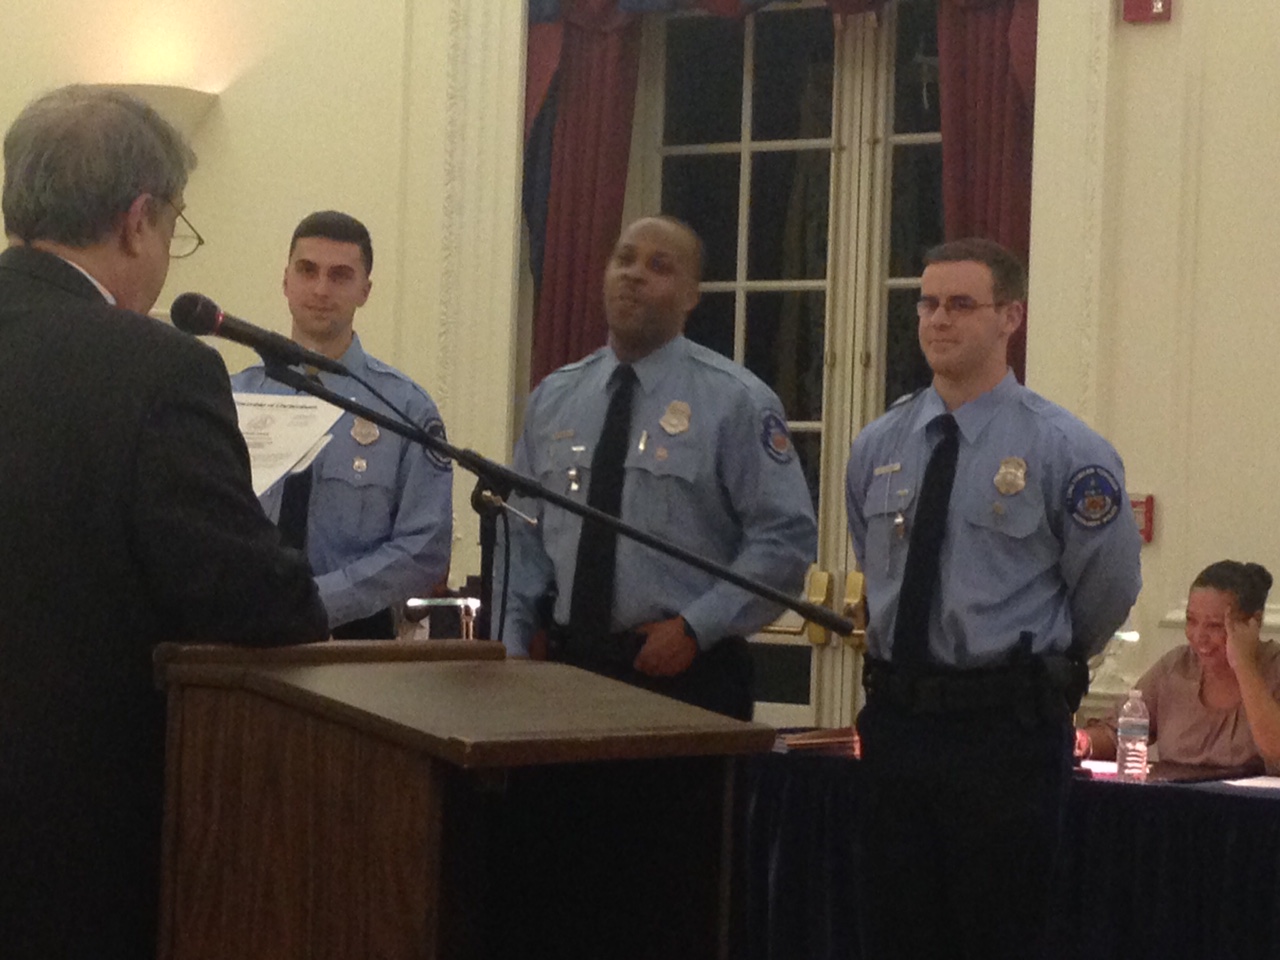 Joseph Long '16 (right) sworn in as an auxiliary officer for the Cheltenham PD.